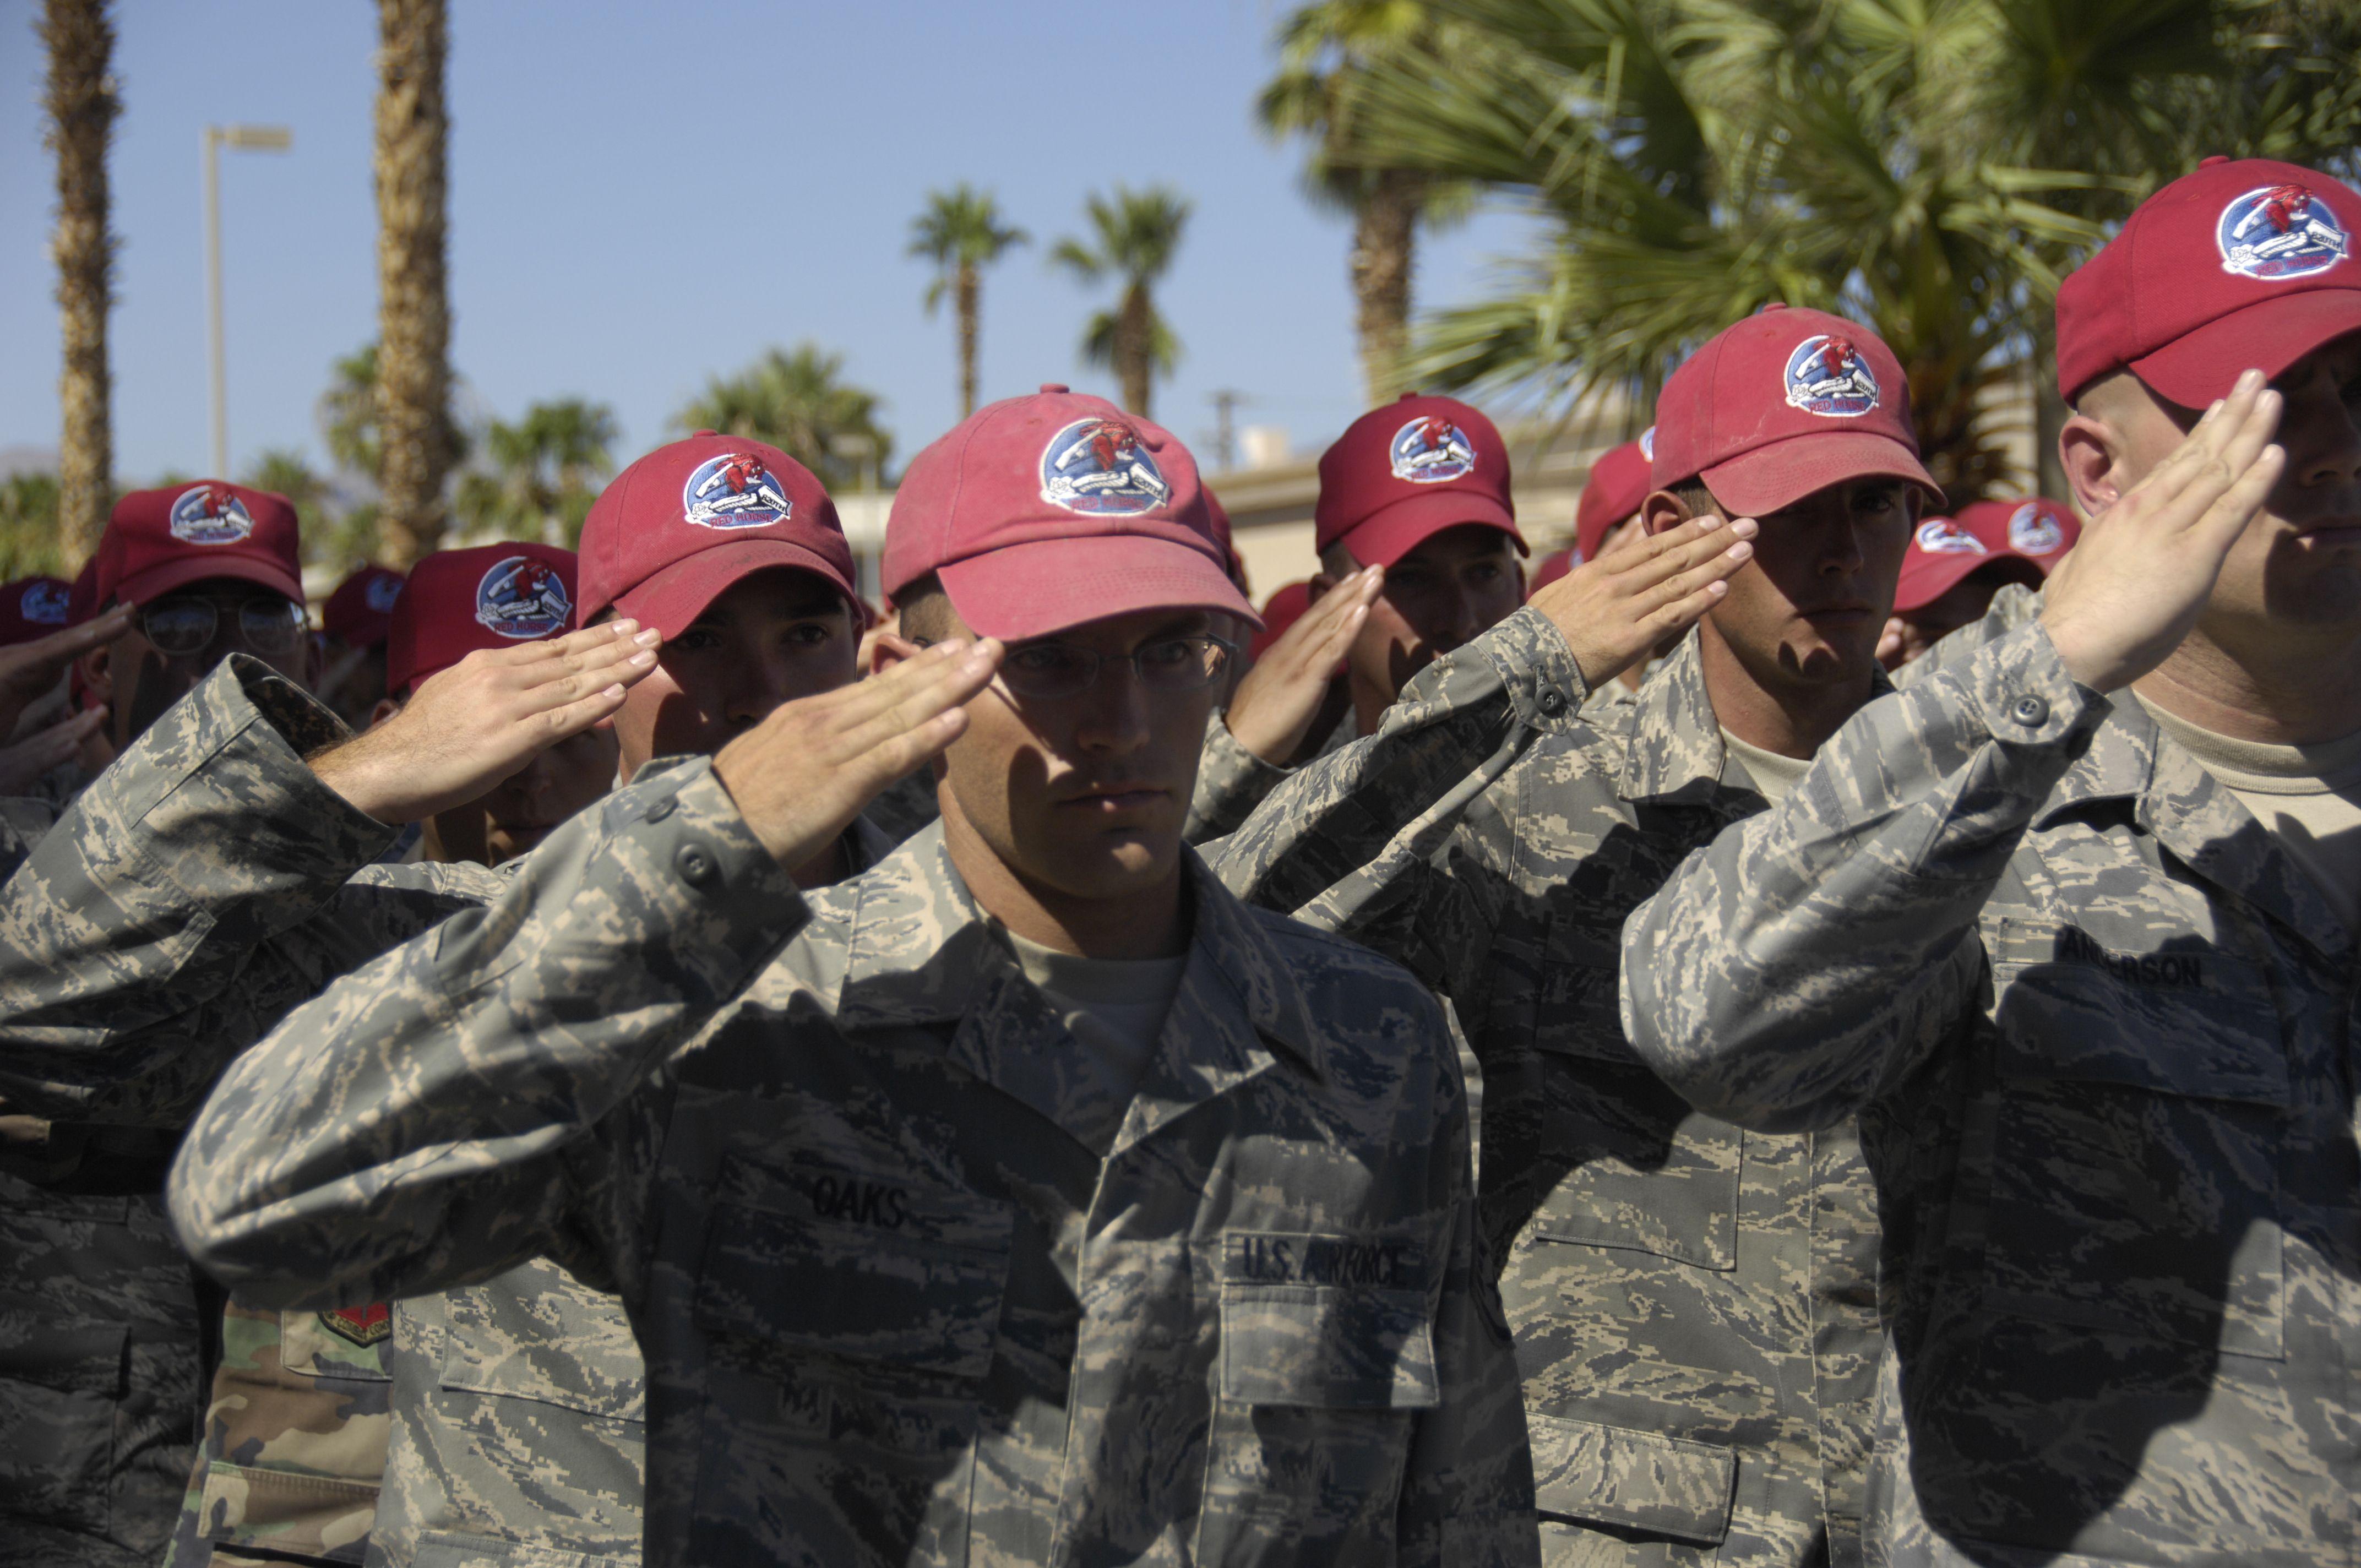 820th Red Horse Logo - 820th RED HORSE Squadron, Nellis remember fallen Airman > Nellis Air ...